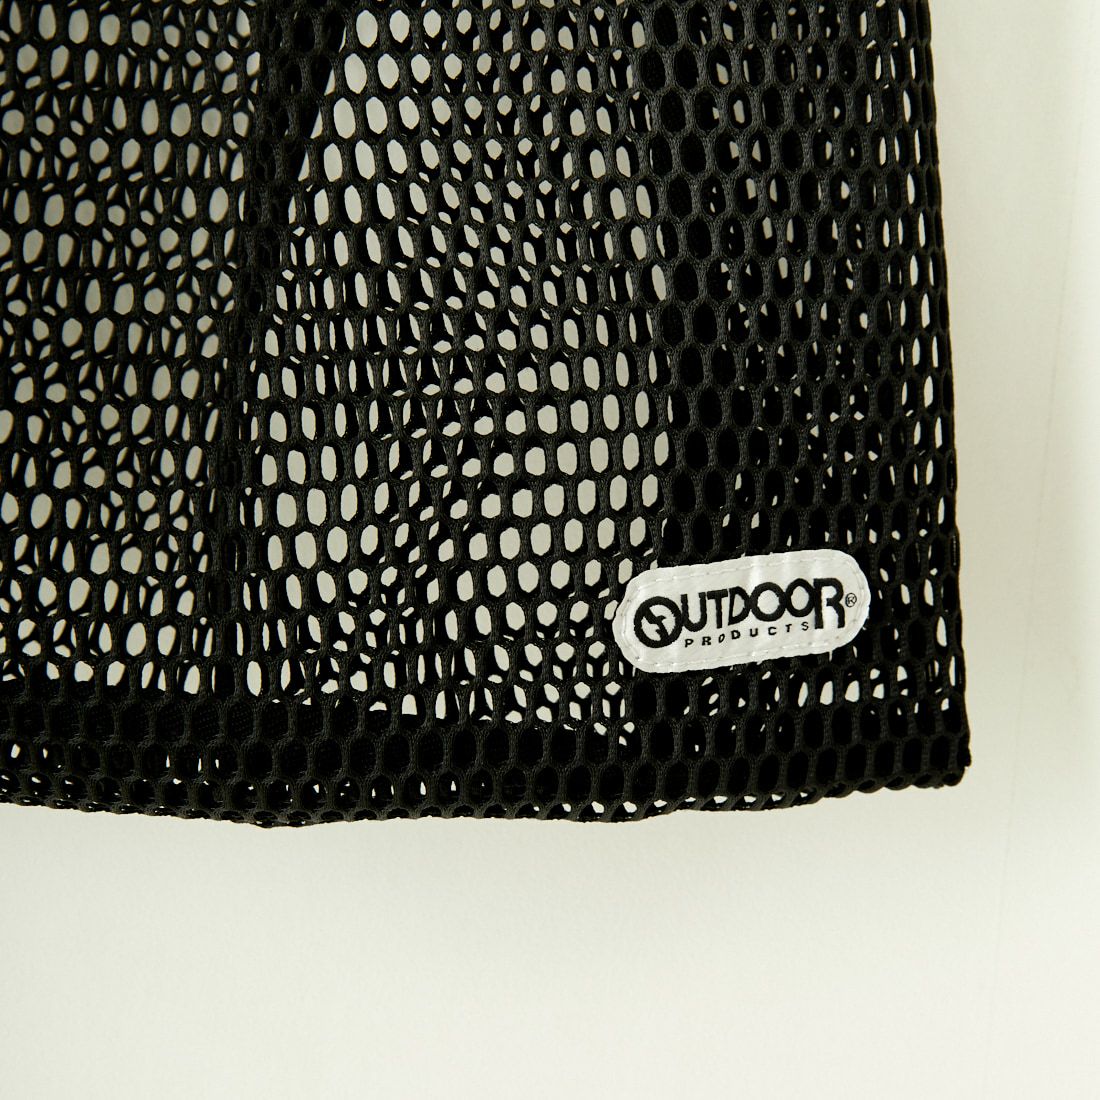 OUTDOOR PRODUCTS [アウトドアプロダクツ] 2WAYメッシュハンドバッグ [BR-OUT-24SS01] BLACK